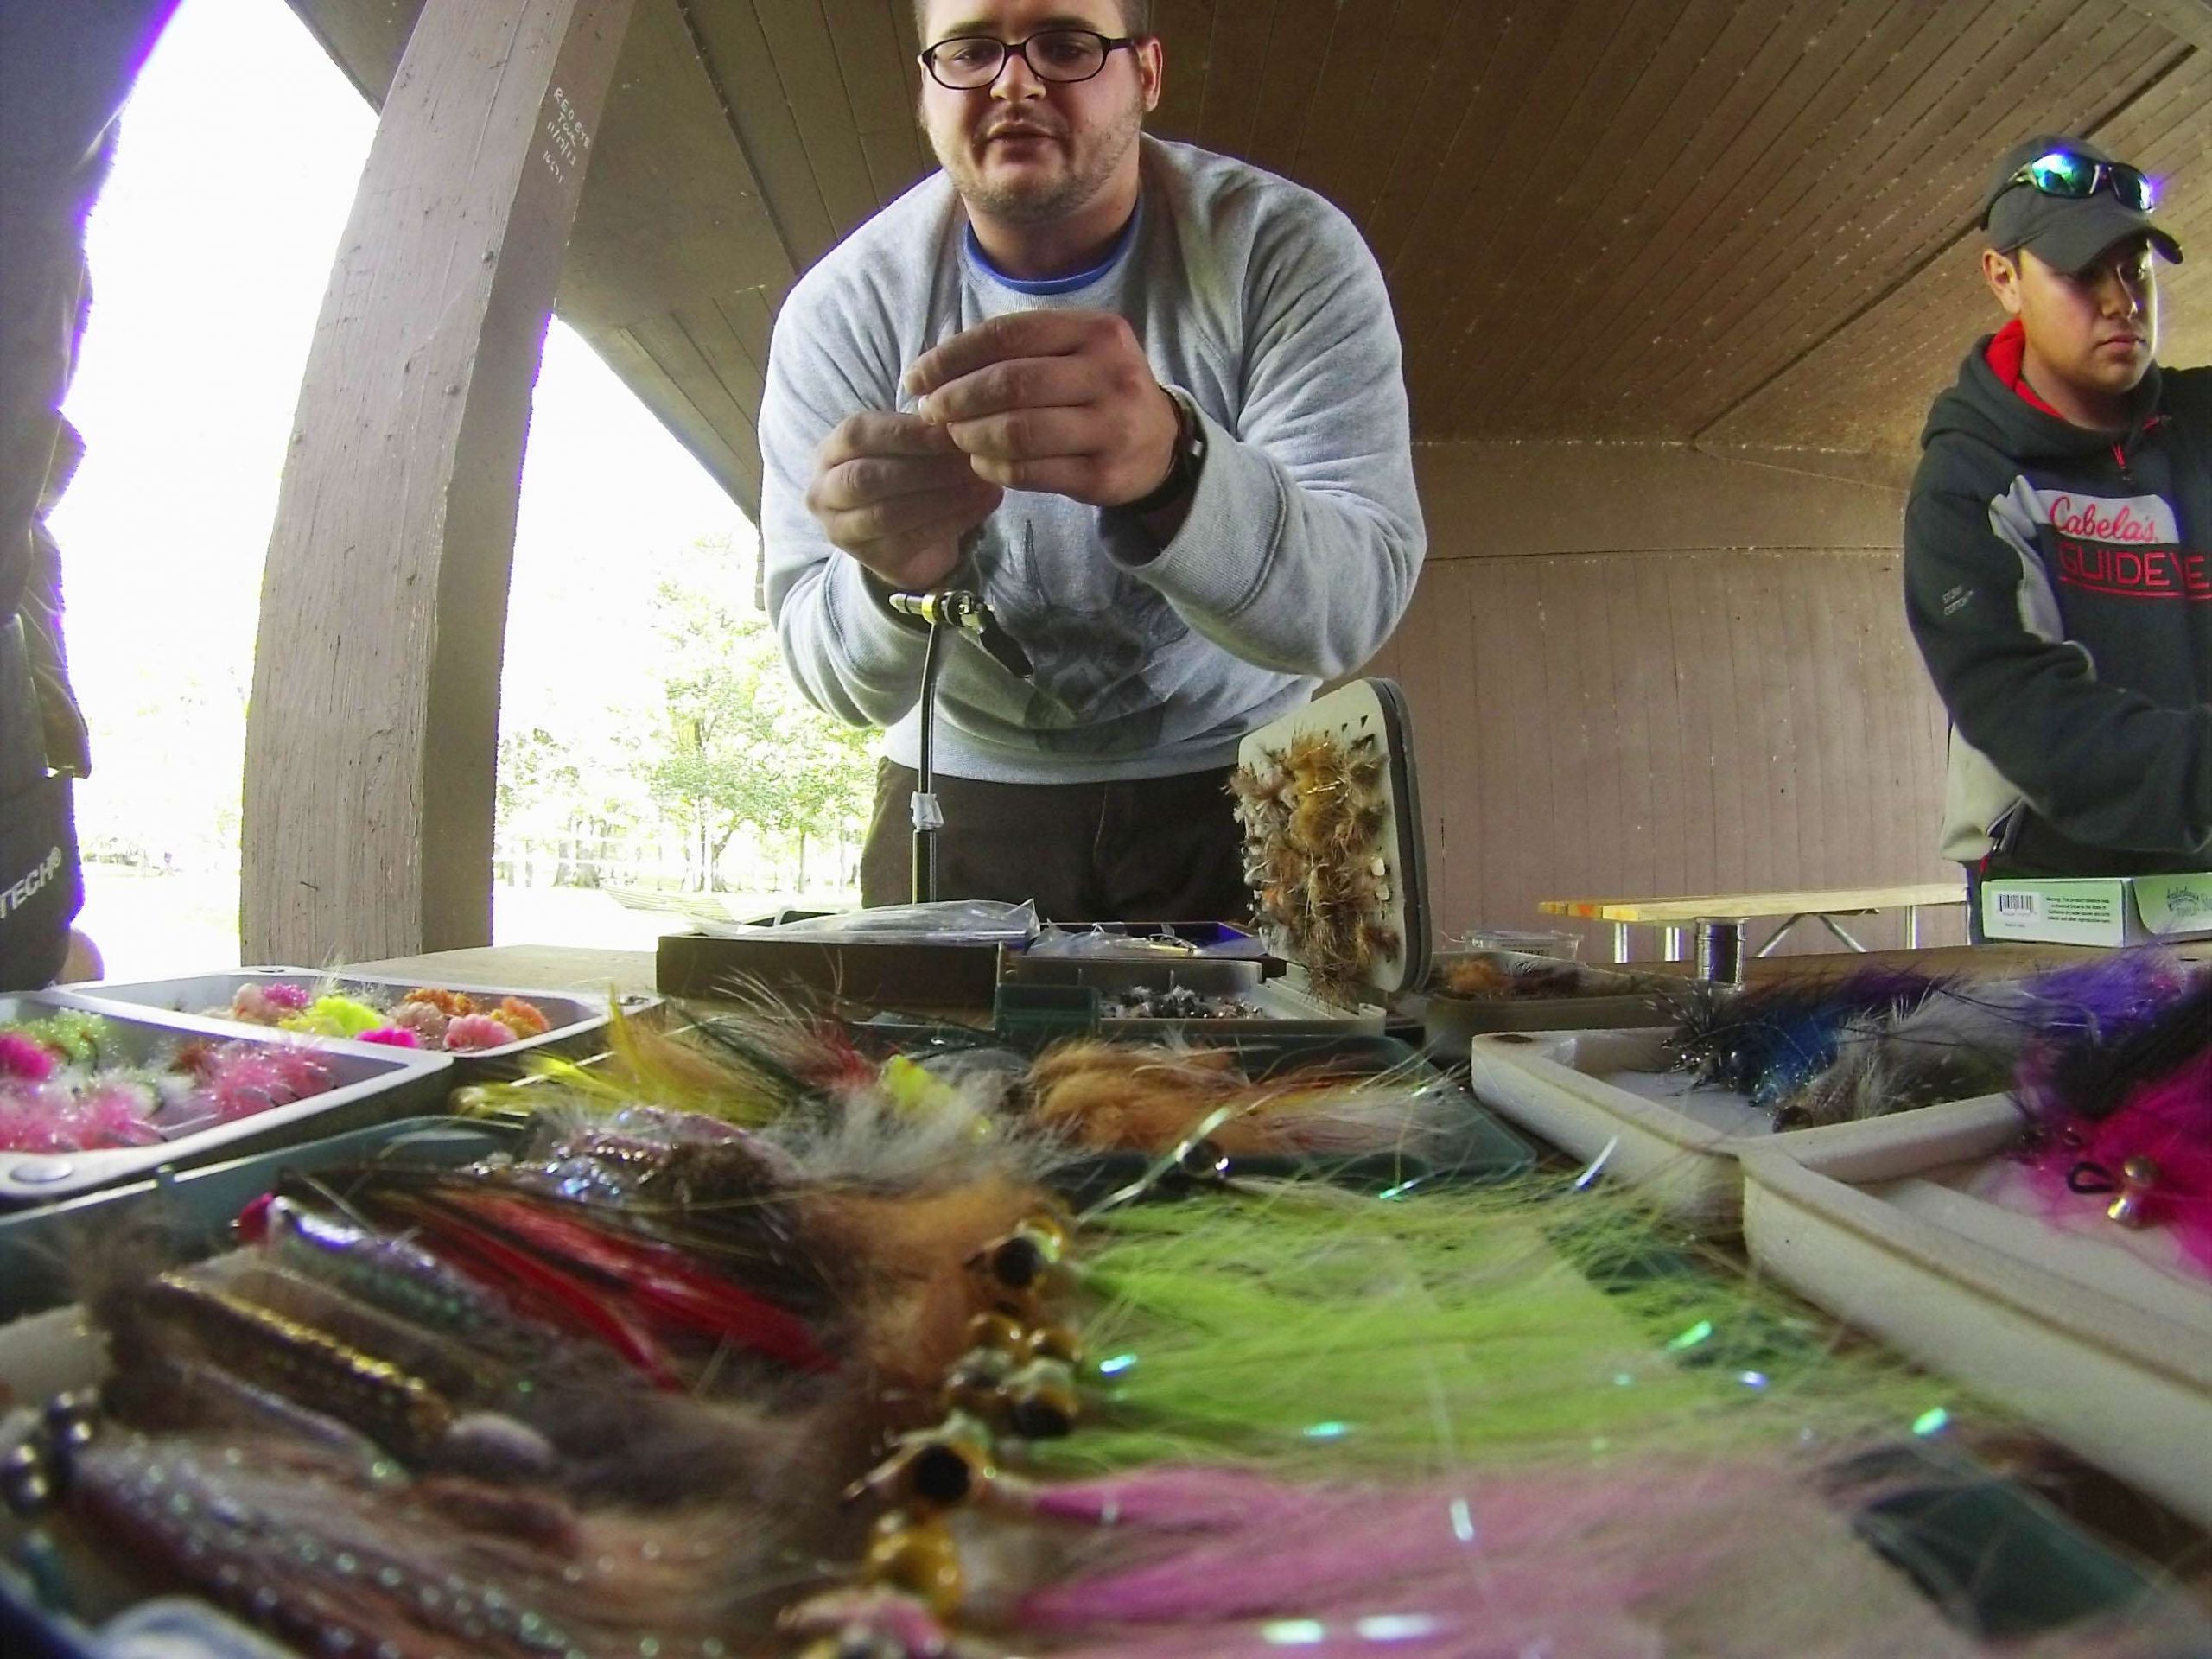 Our fly fishing instructor, Andrew Messina, showed us how fly fishing differs by the use of hand-tied flies that are used to resemble natural bait species. 